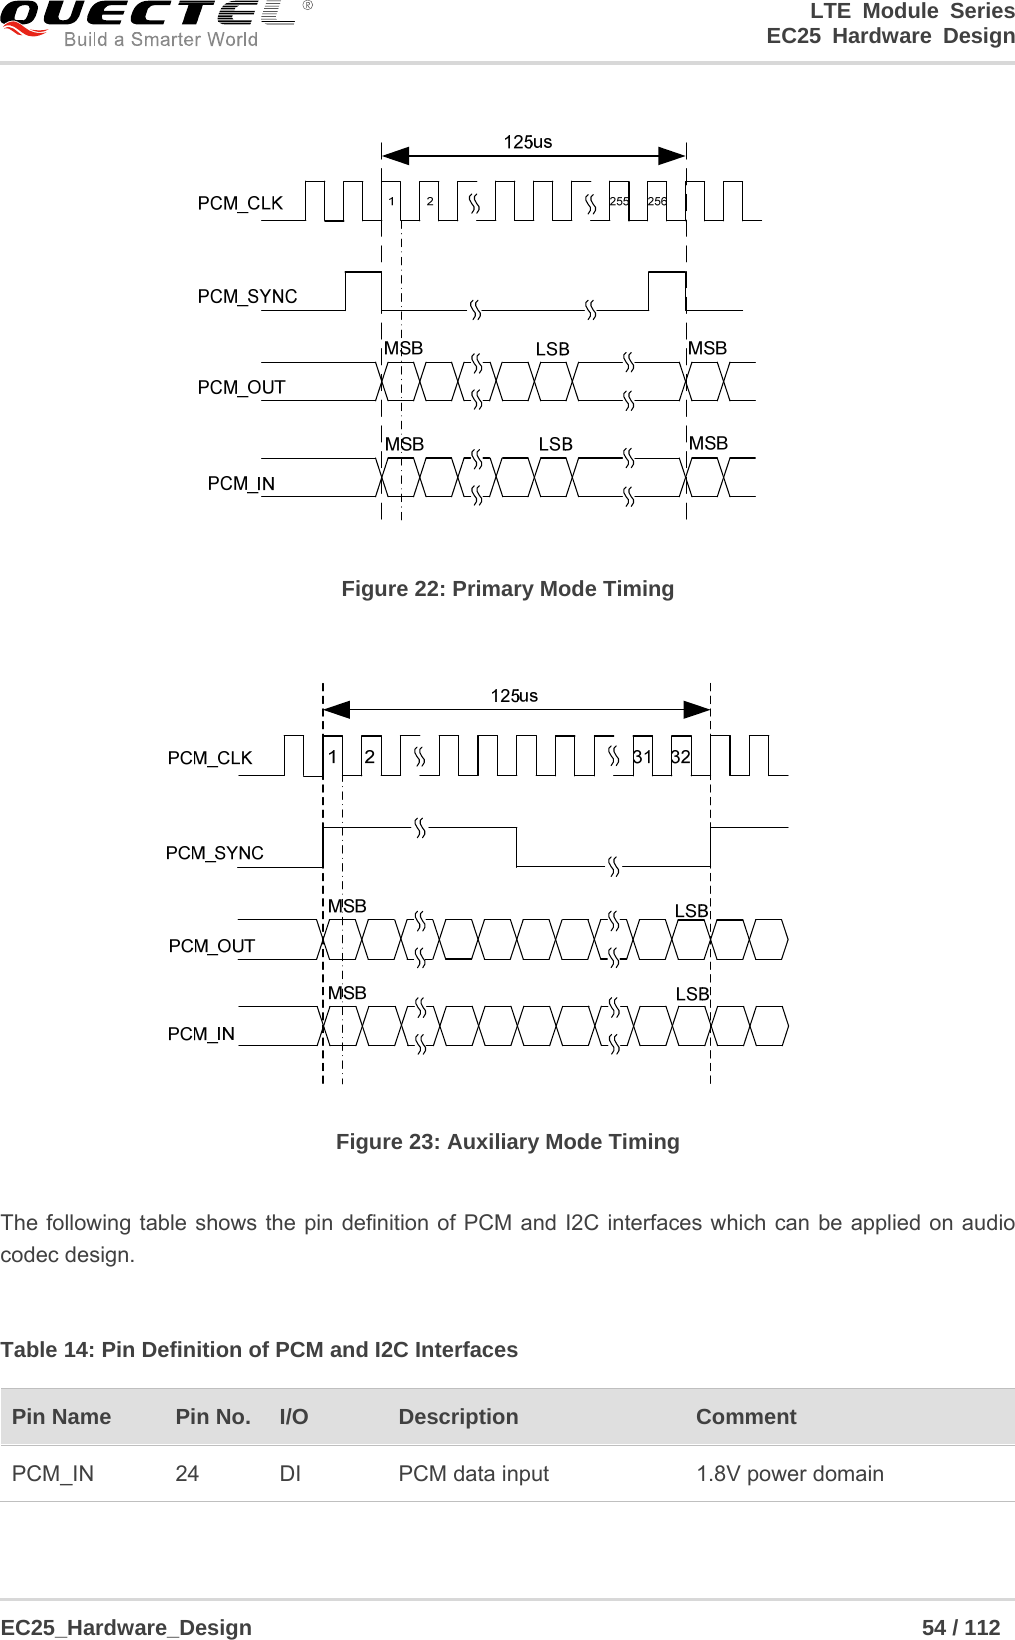 LTE Module Series                                                  EC25 Hardware Design  EC25_Hardware_Design                                                             54 / 112     Figure 22: Primary Mode Timing  Figure 23: Auxiliary Mode Timing  The following table shows the pin definition of PCM and I2C interfaces which can be applied on audio codec design.  Table 14: Pin Definition of PCM and I2C Interfaces Pin Name    Pin No.  I/O  Description   Comment PCM_IN  24  DI  PCM data input  1.8V power domain 